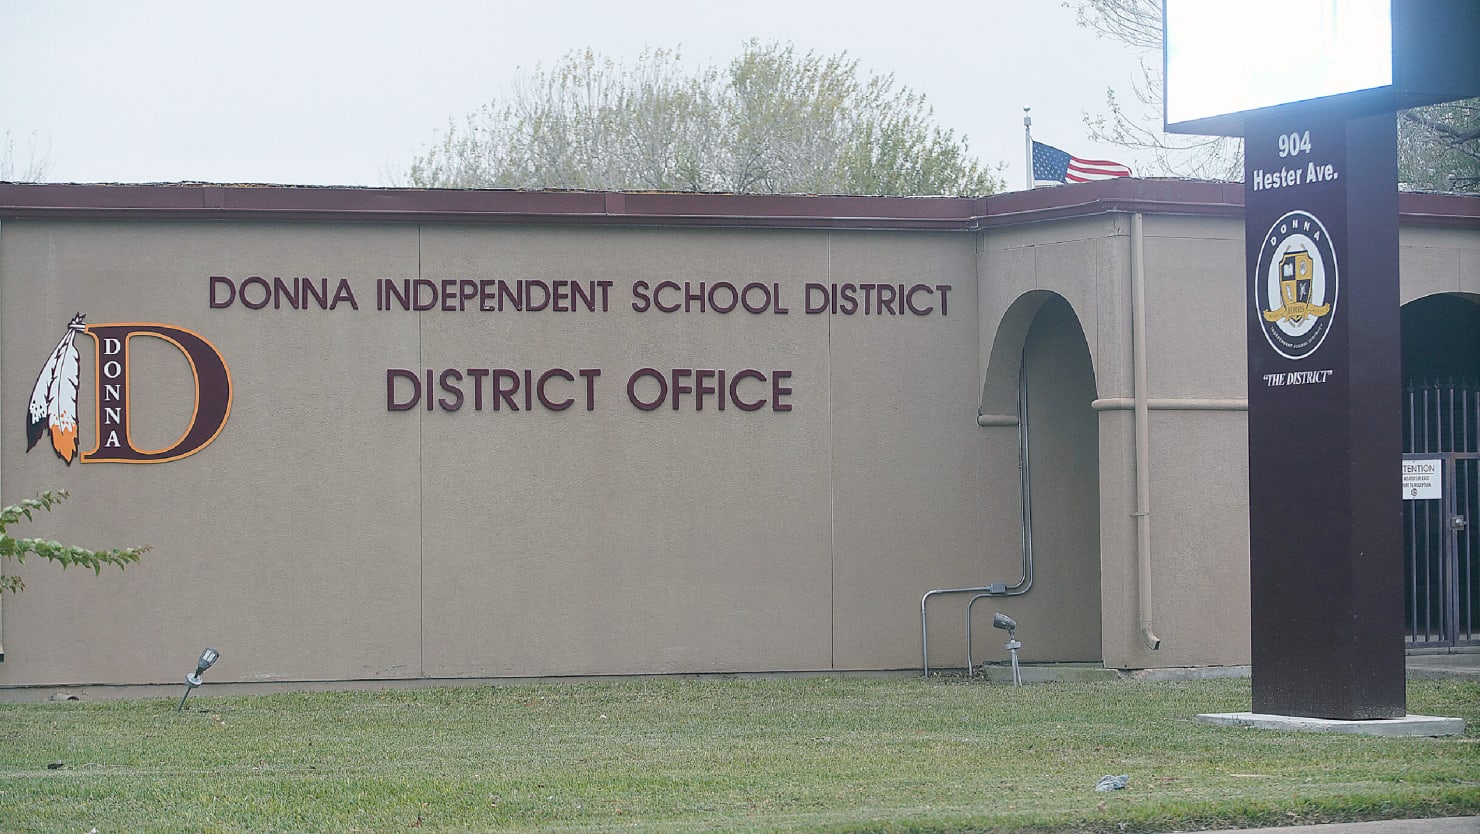 AK-47 and Student ‘Hit List’ Found Destined for Another Texas School, District Says